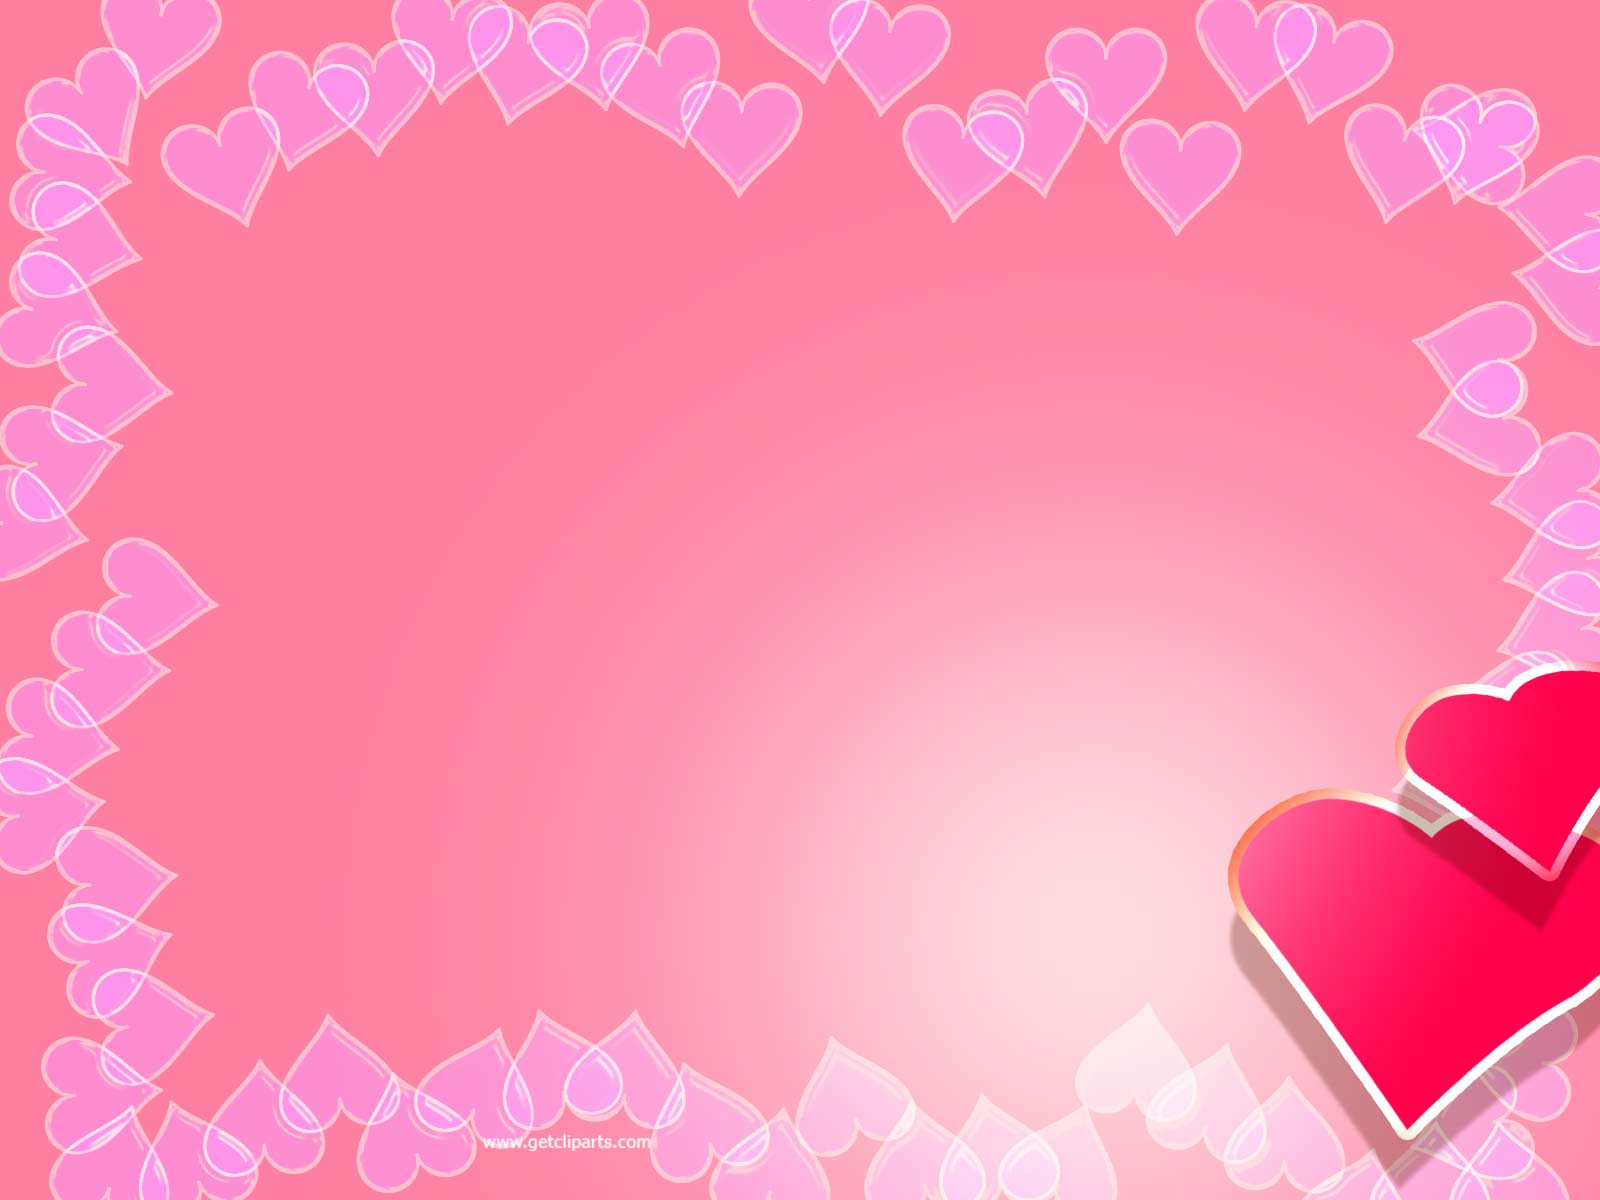 Pink Valentines Day Backgrounds 8283 Hd Wallpapers in Celebrations